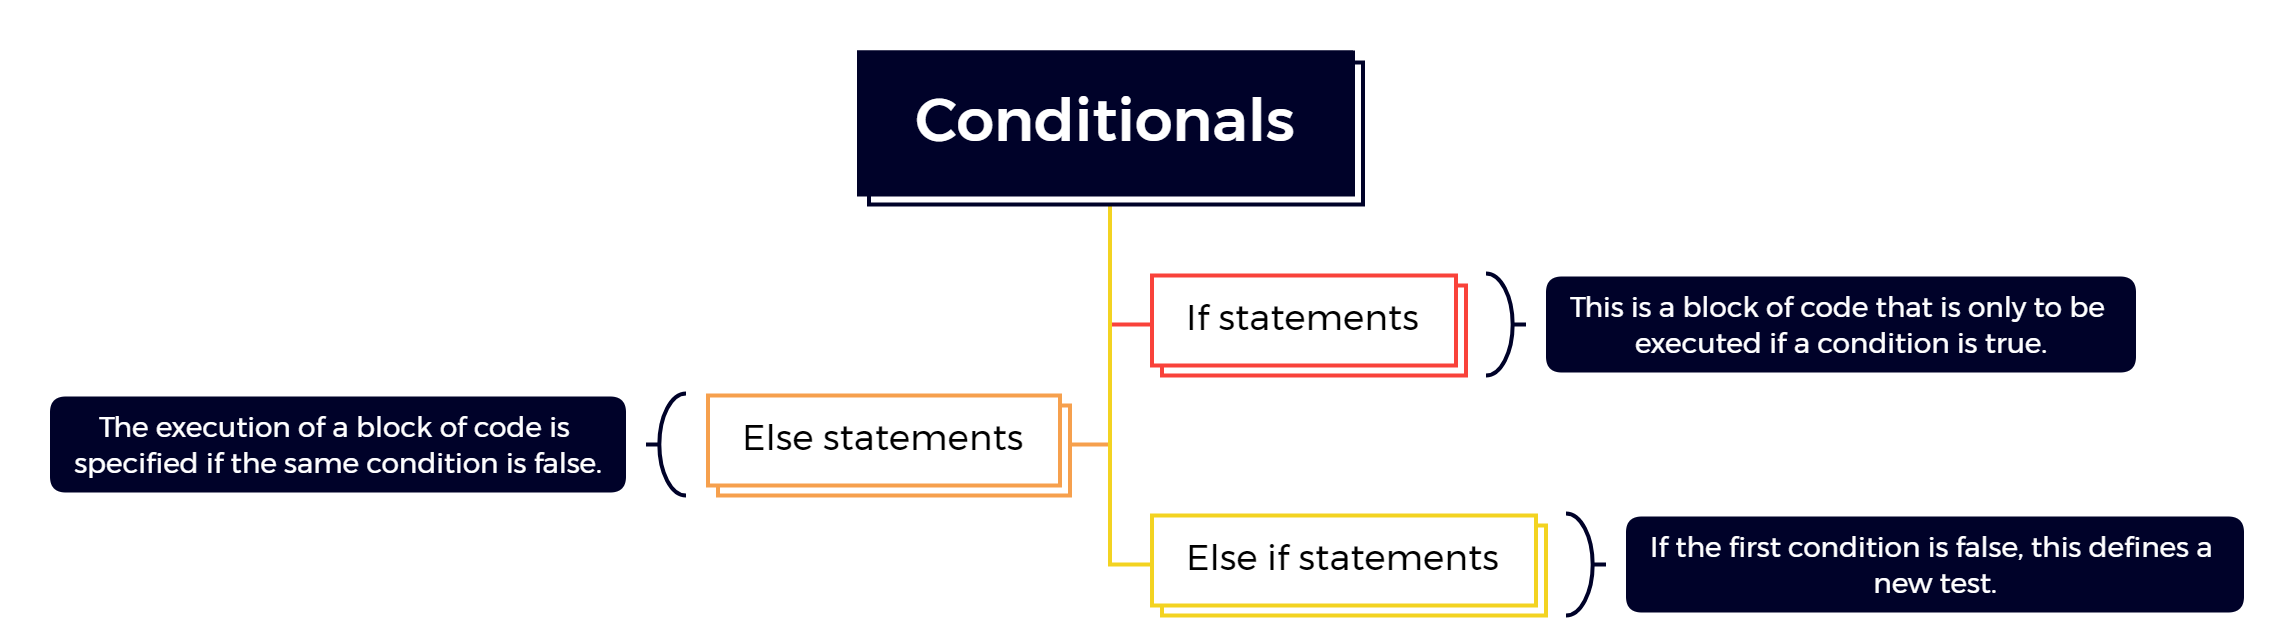 Conditionals.png